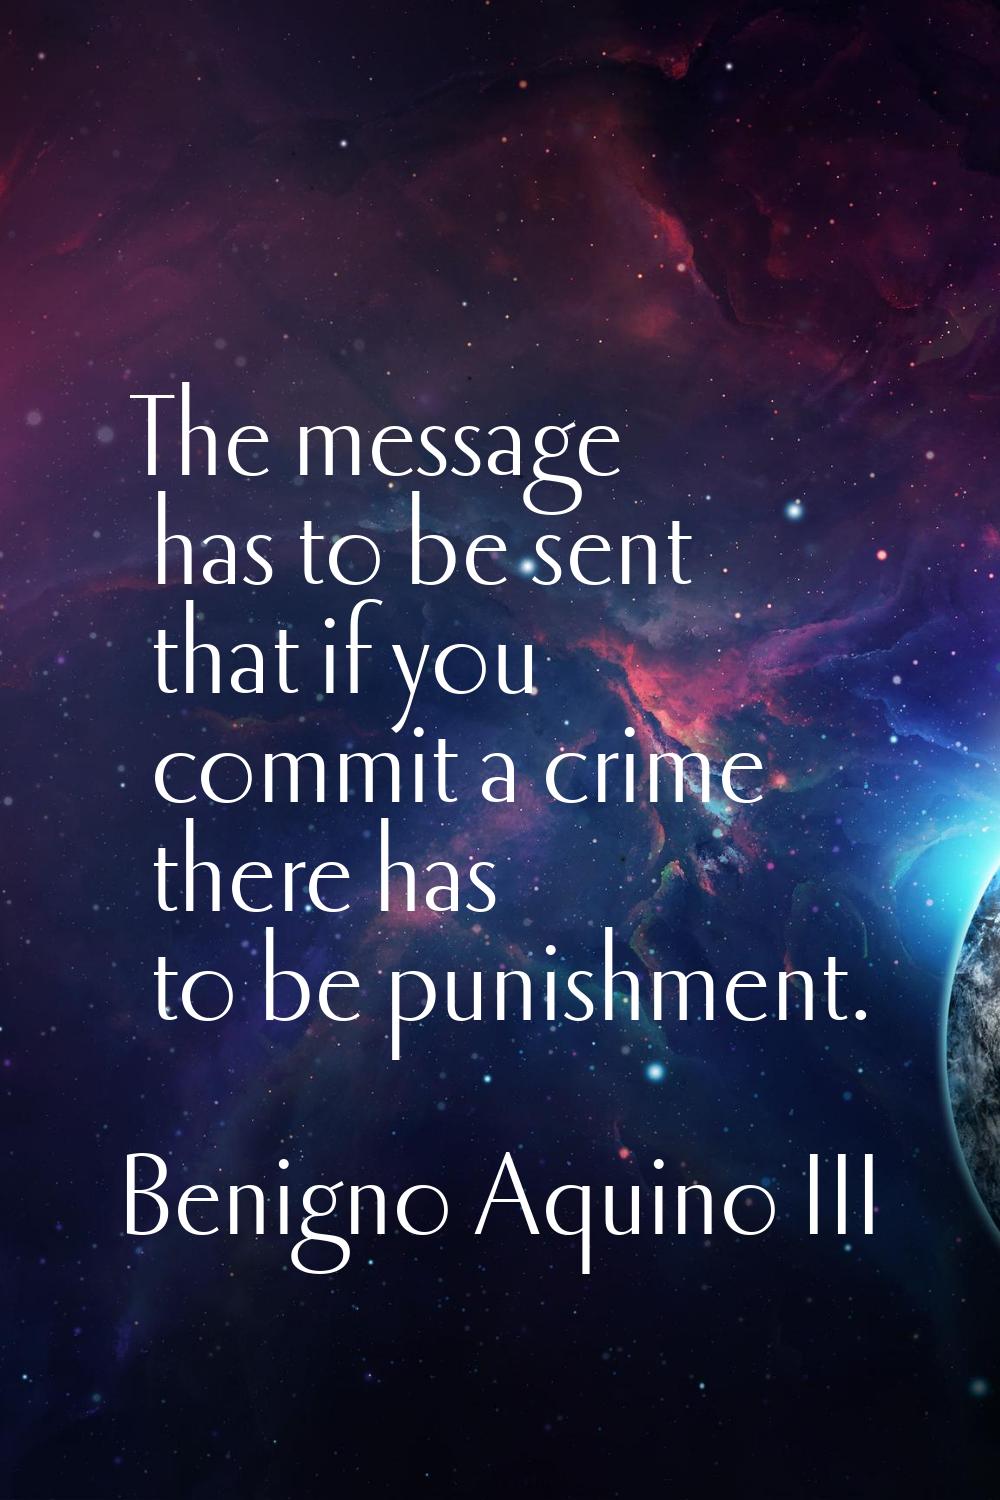 The message has to be sent that if you commit a crime there has to be punishment.